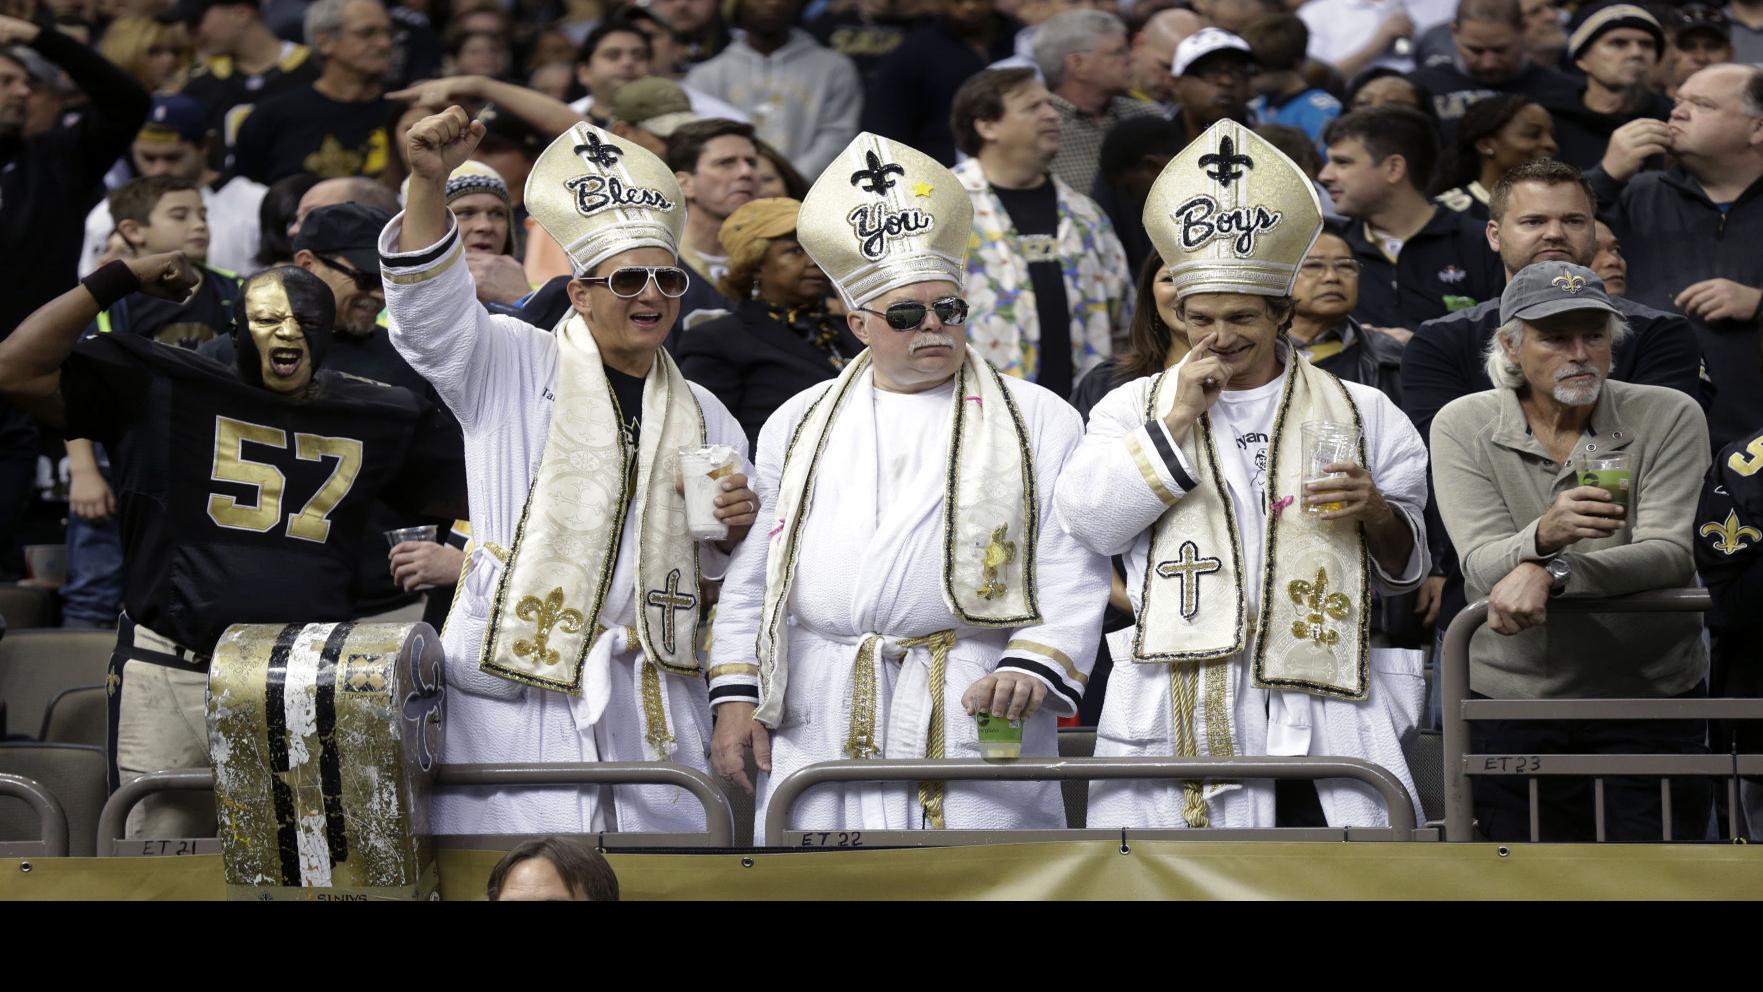 What happens when Saints superfans, like 2 of the 3 Bless You Boys Popes,  retire? New Popes pop up, Saints